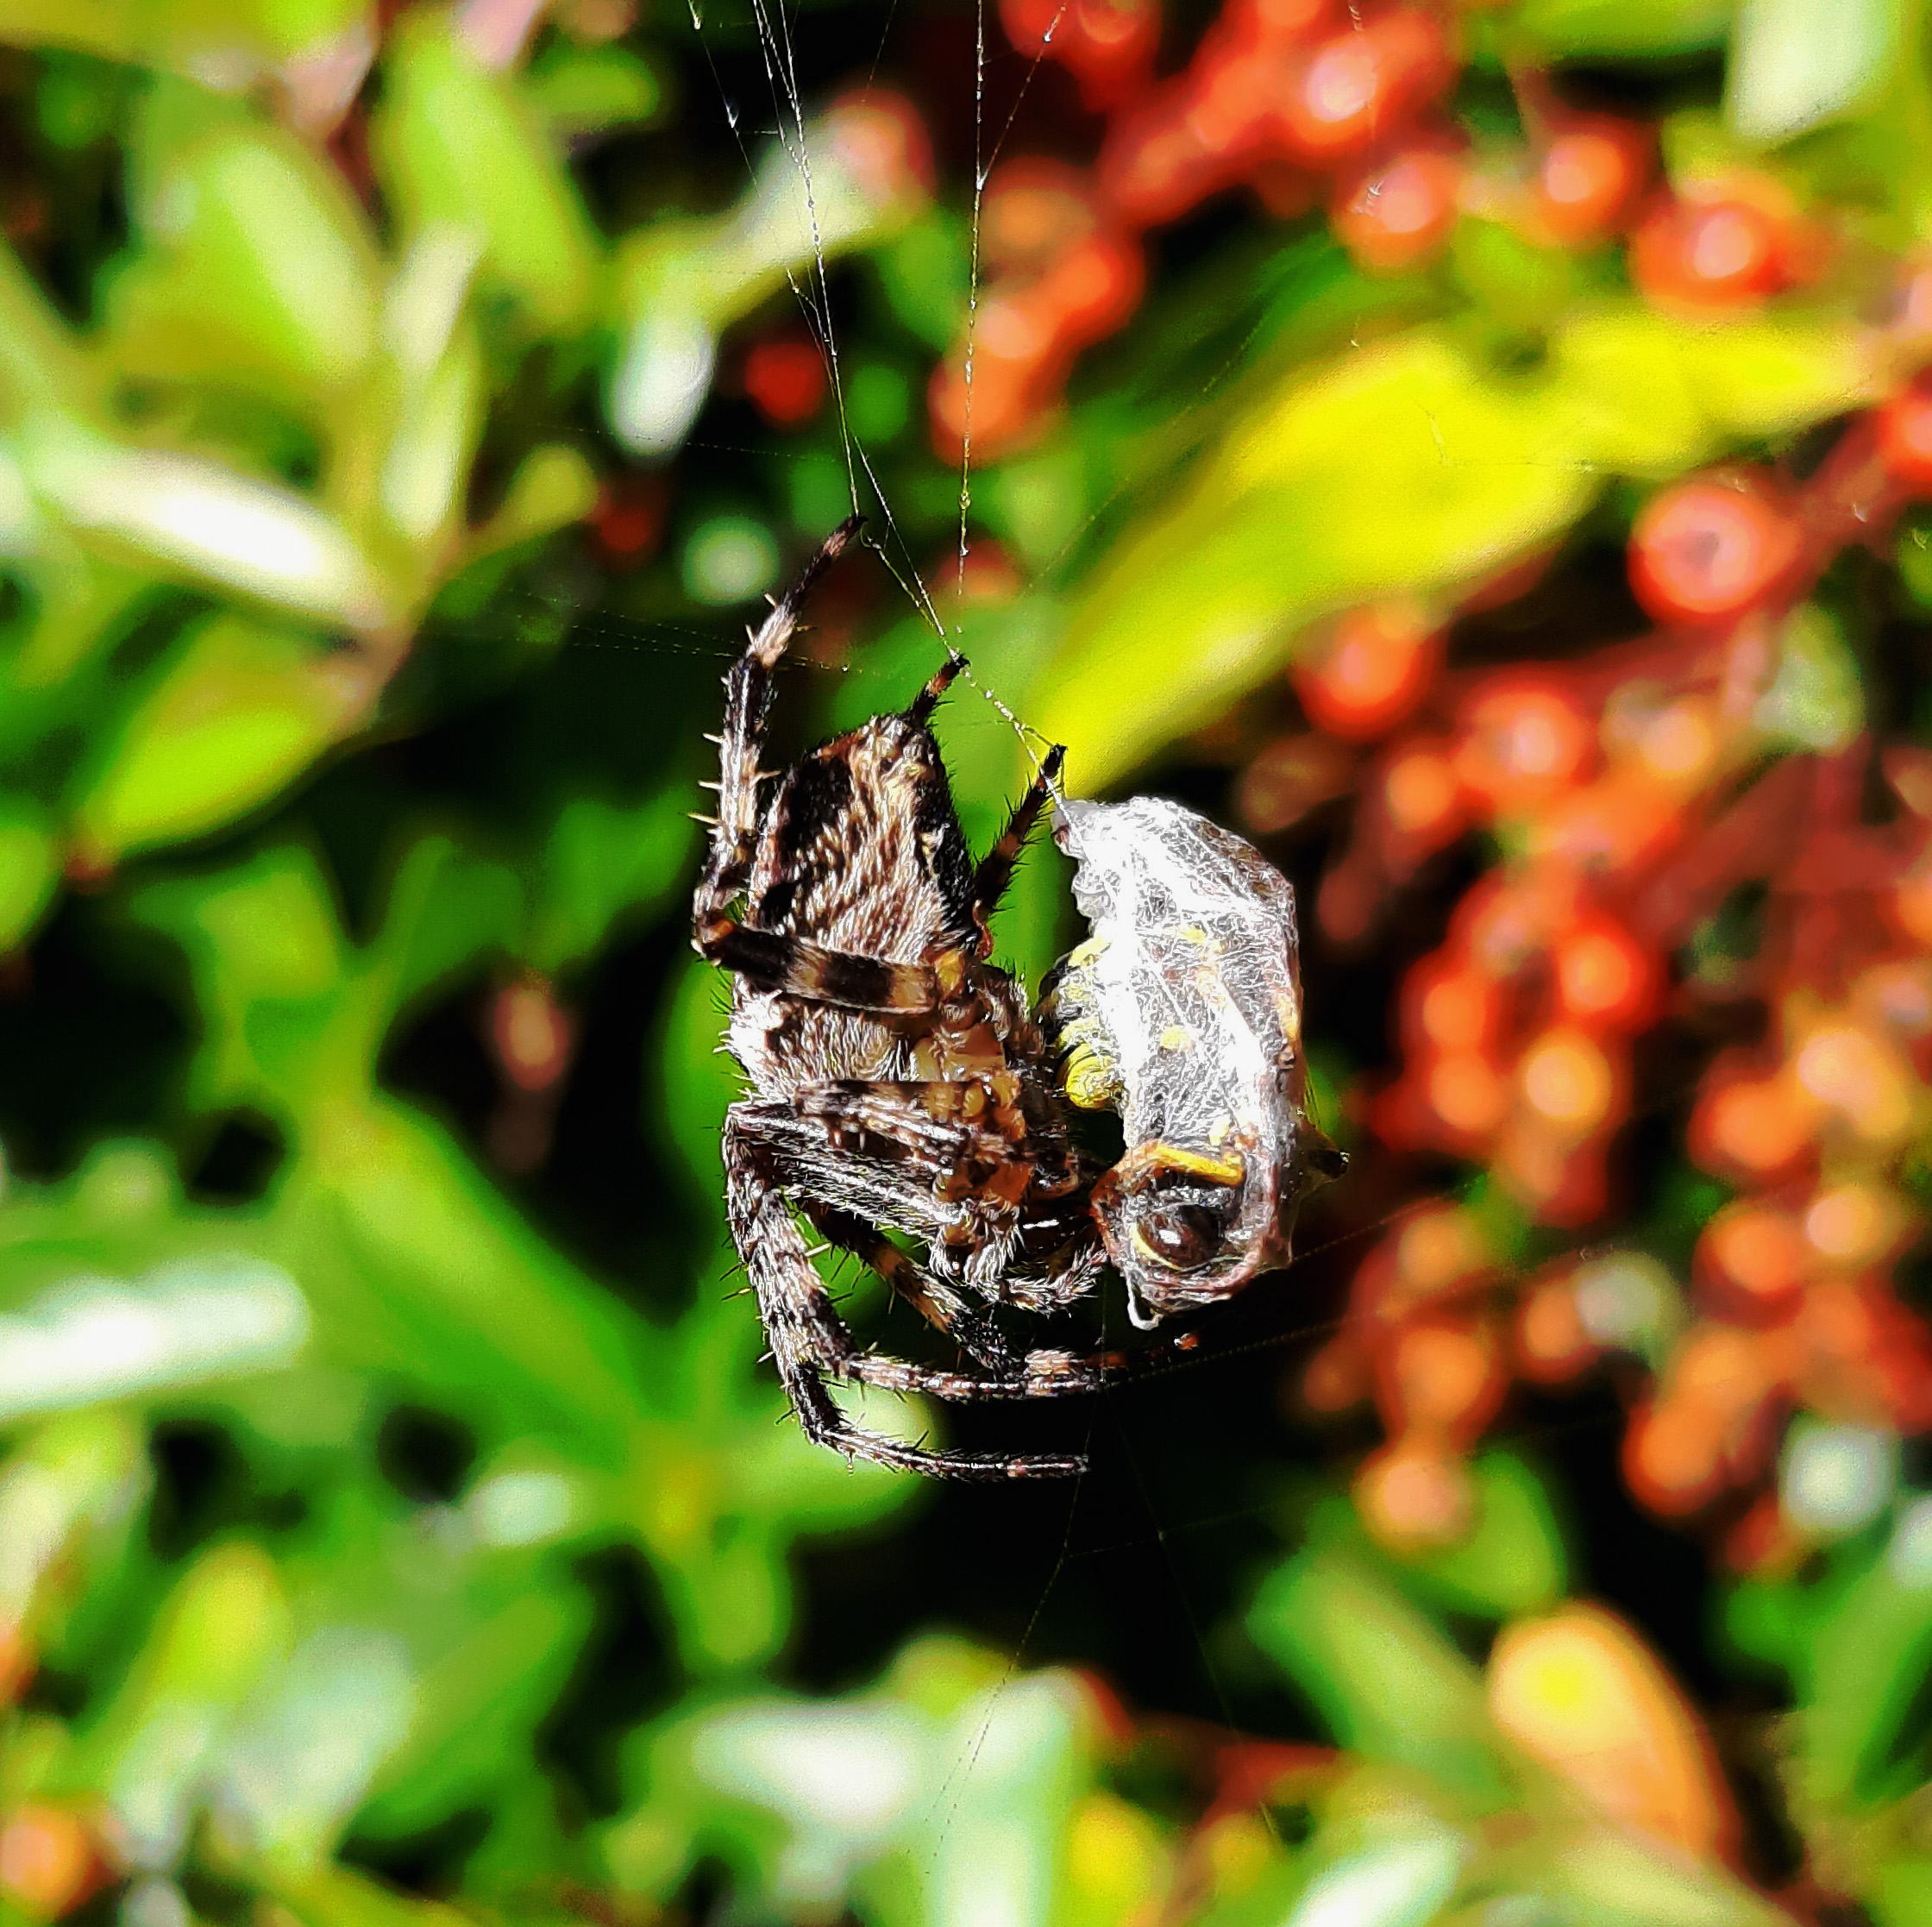 Close up image of a spider wrapping an insect in its web against a backdrop of bright green leaves and red berries.